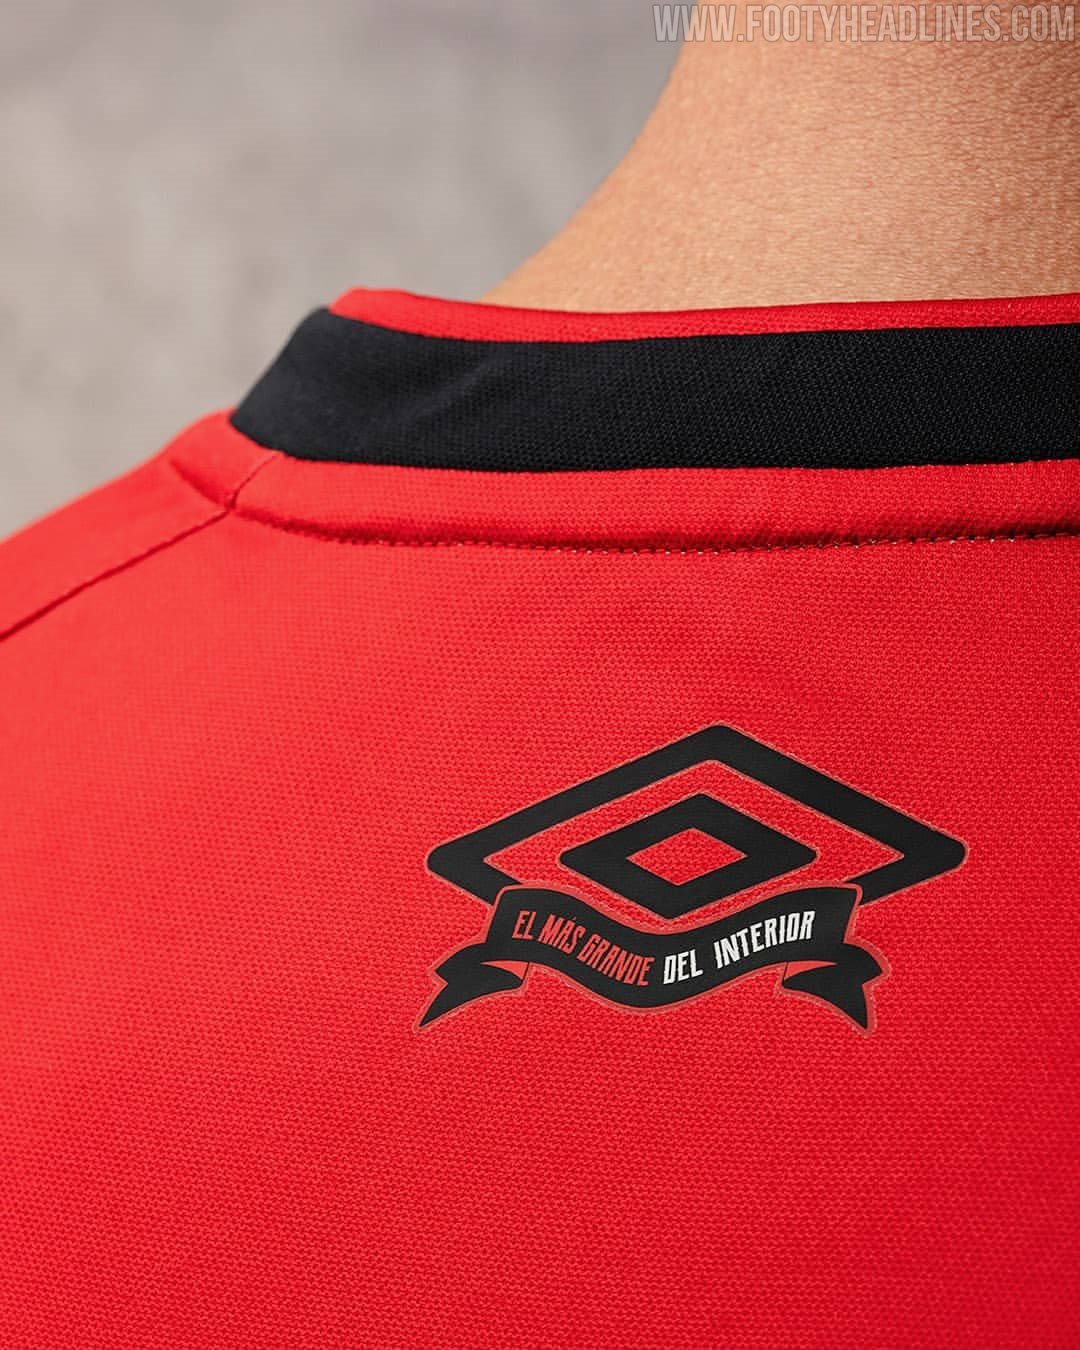 Newell's Old Boys 20-21 Fourth Kit Released - Footy Headlines